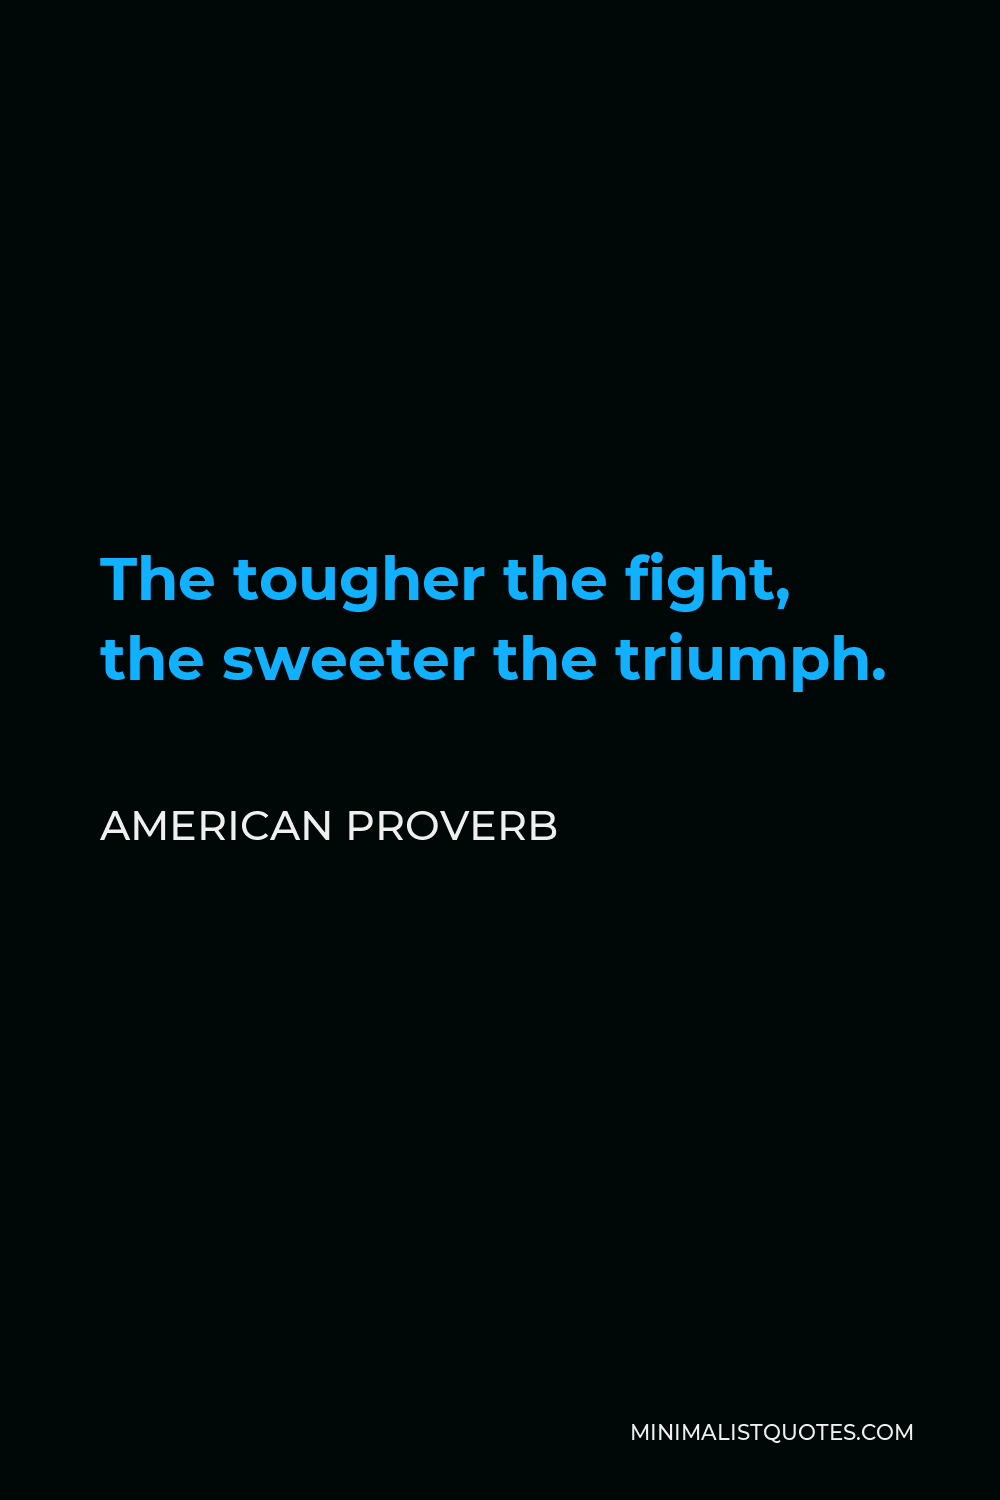 American Proverb Quote - The tougher the fight, the sweeter the triumph.